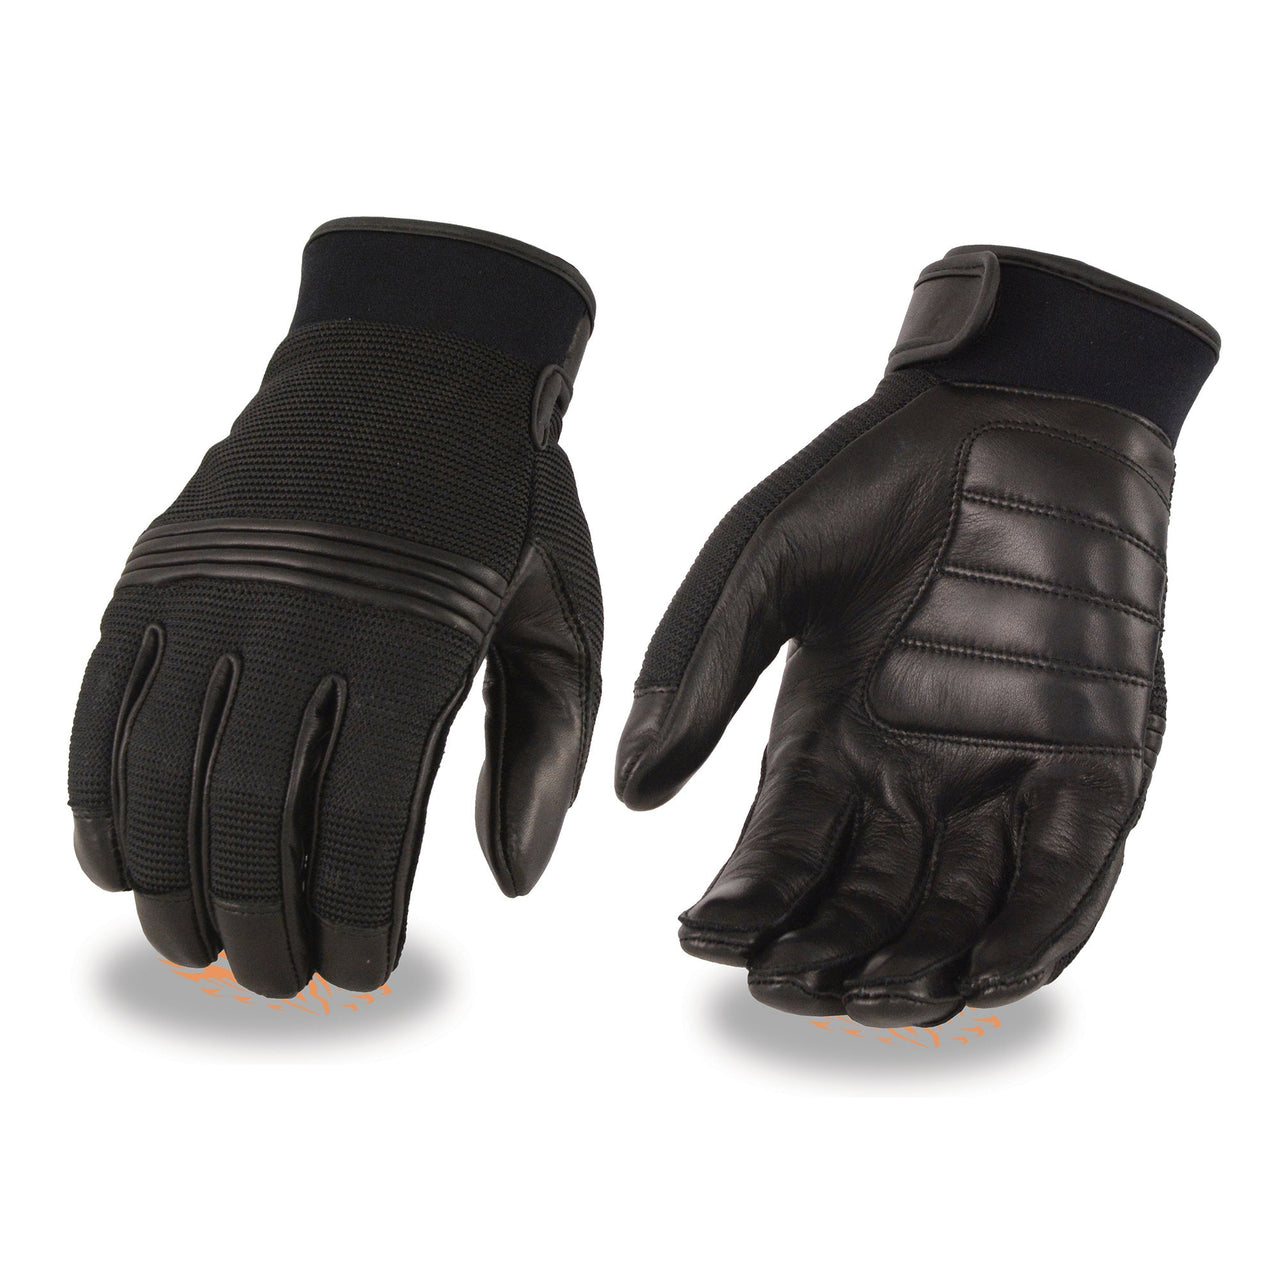 Men's Leather/Mesh Perforated Glove w/ Gel Palm & Flex Knuckles - HighwayLeather